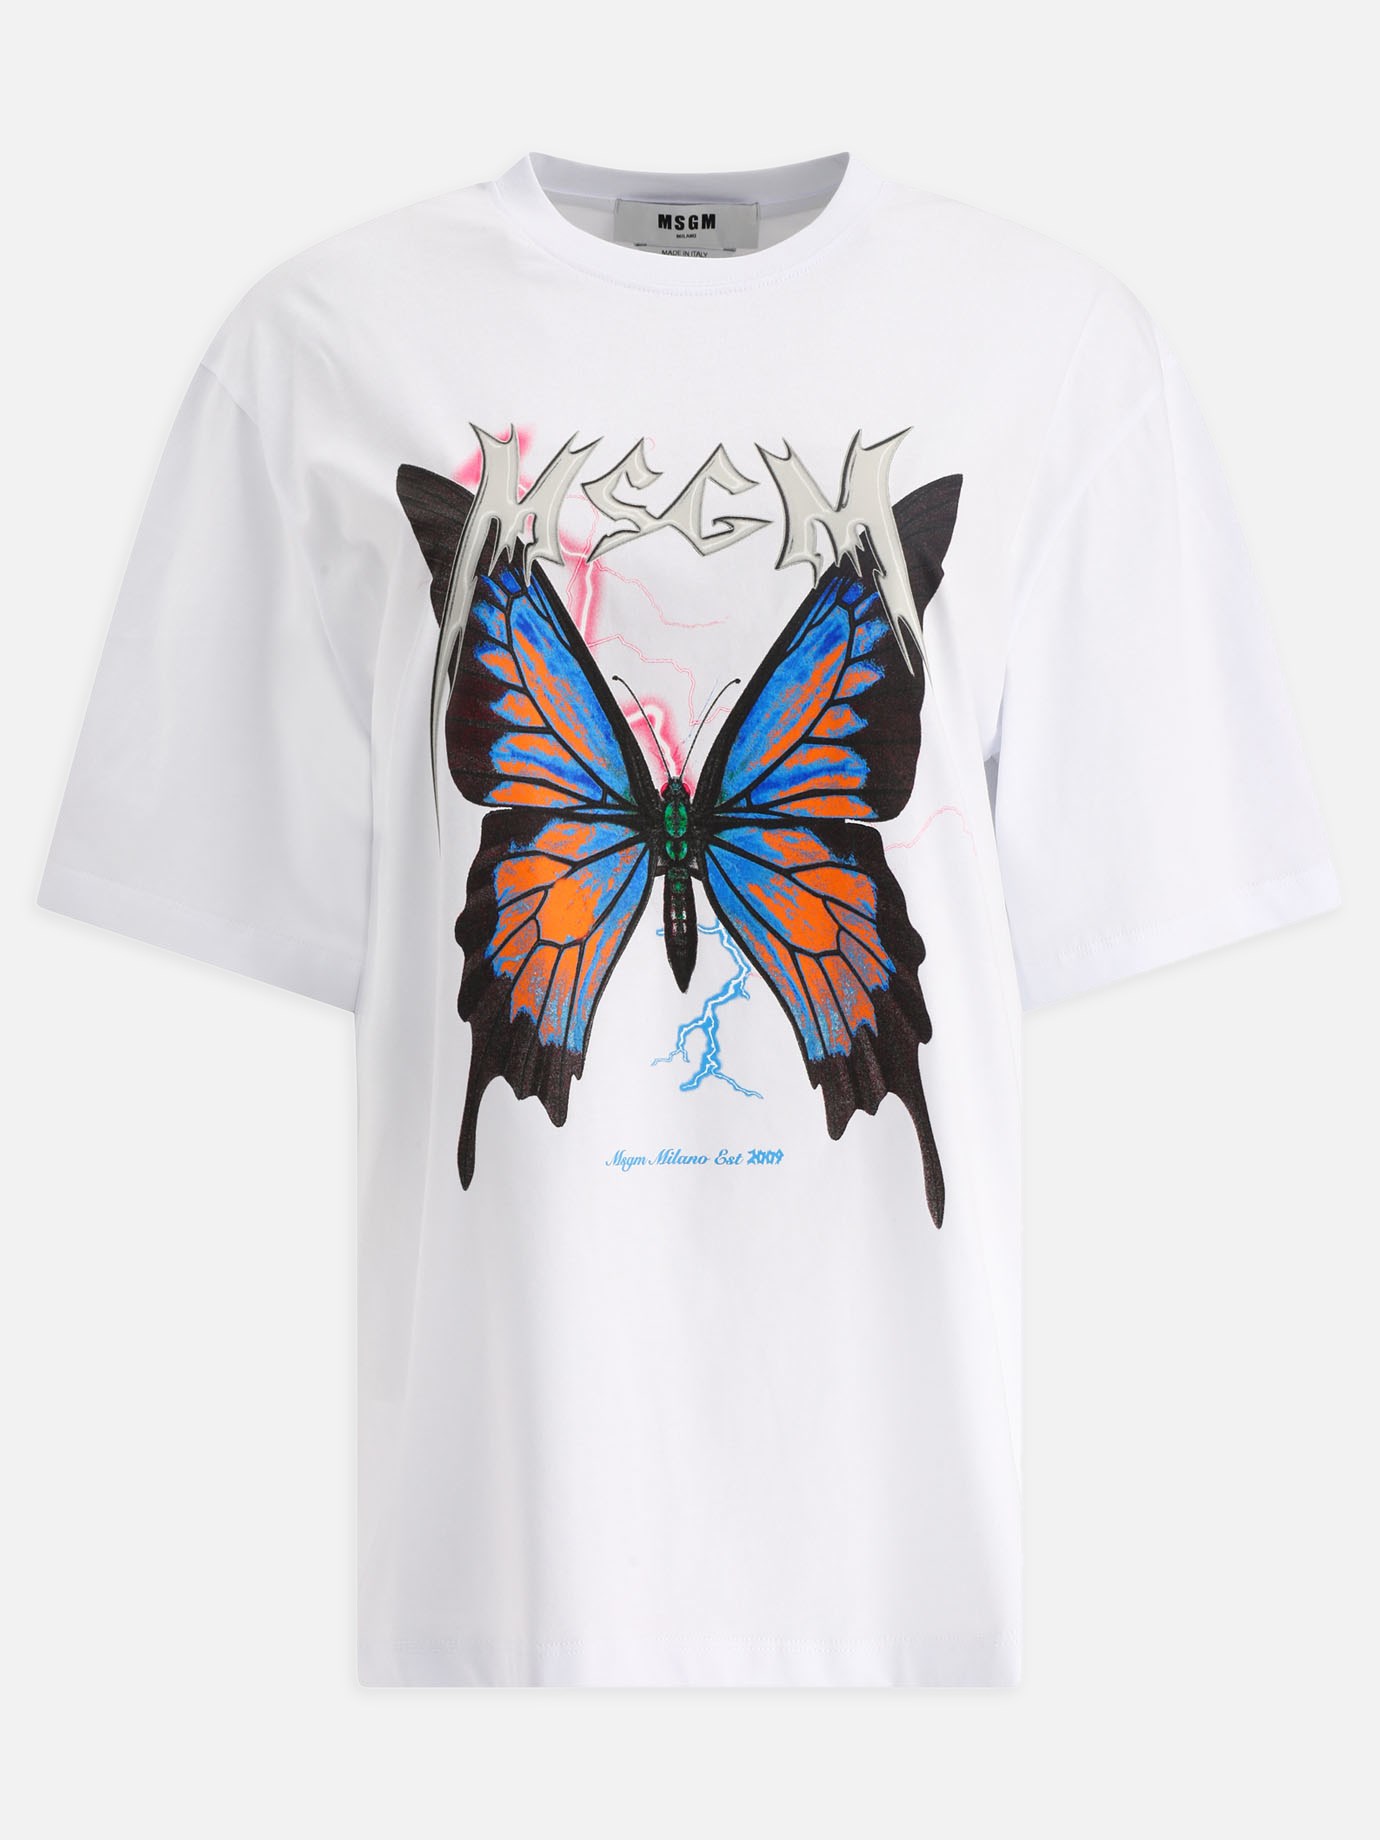  Butterfly  t-shirtby Msgm - 1